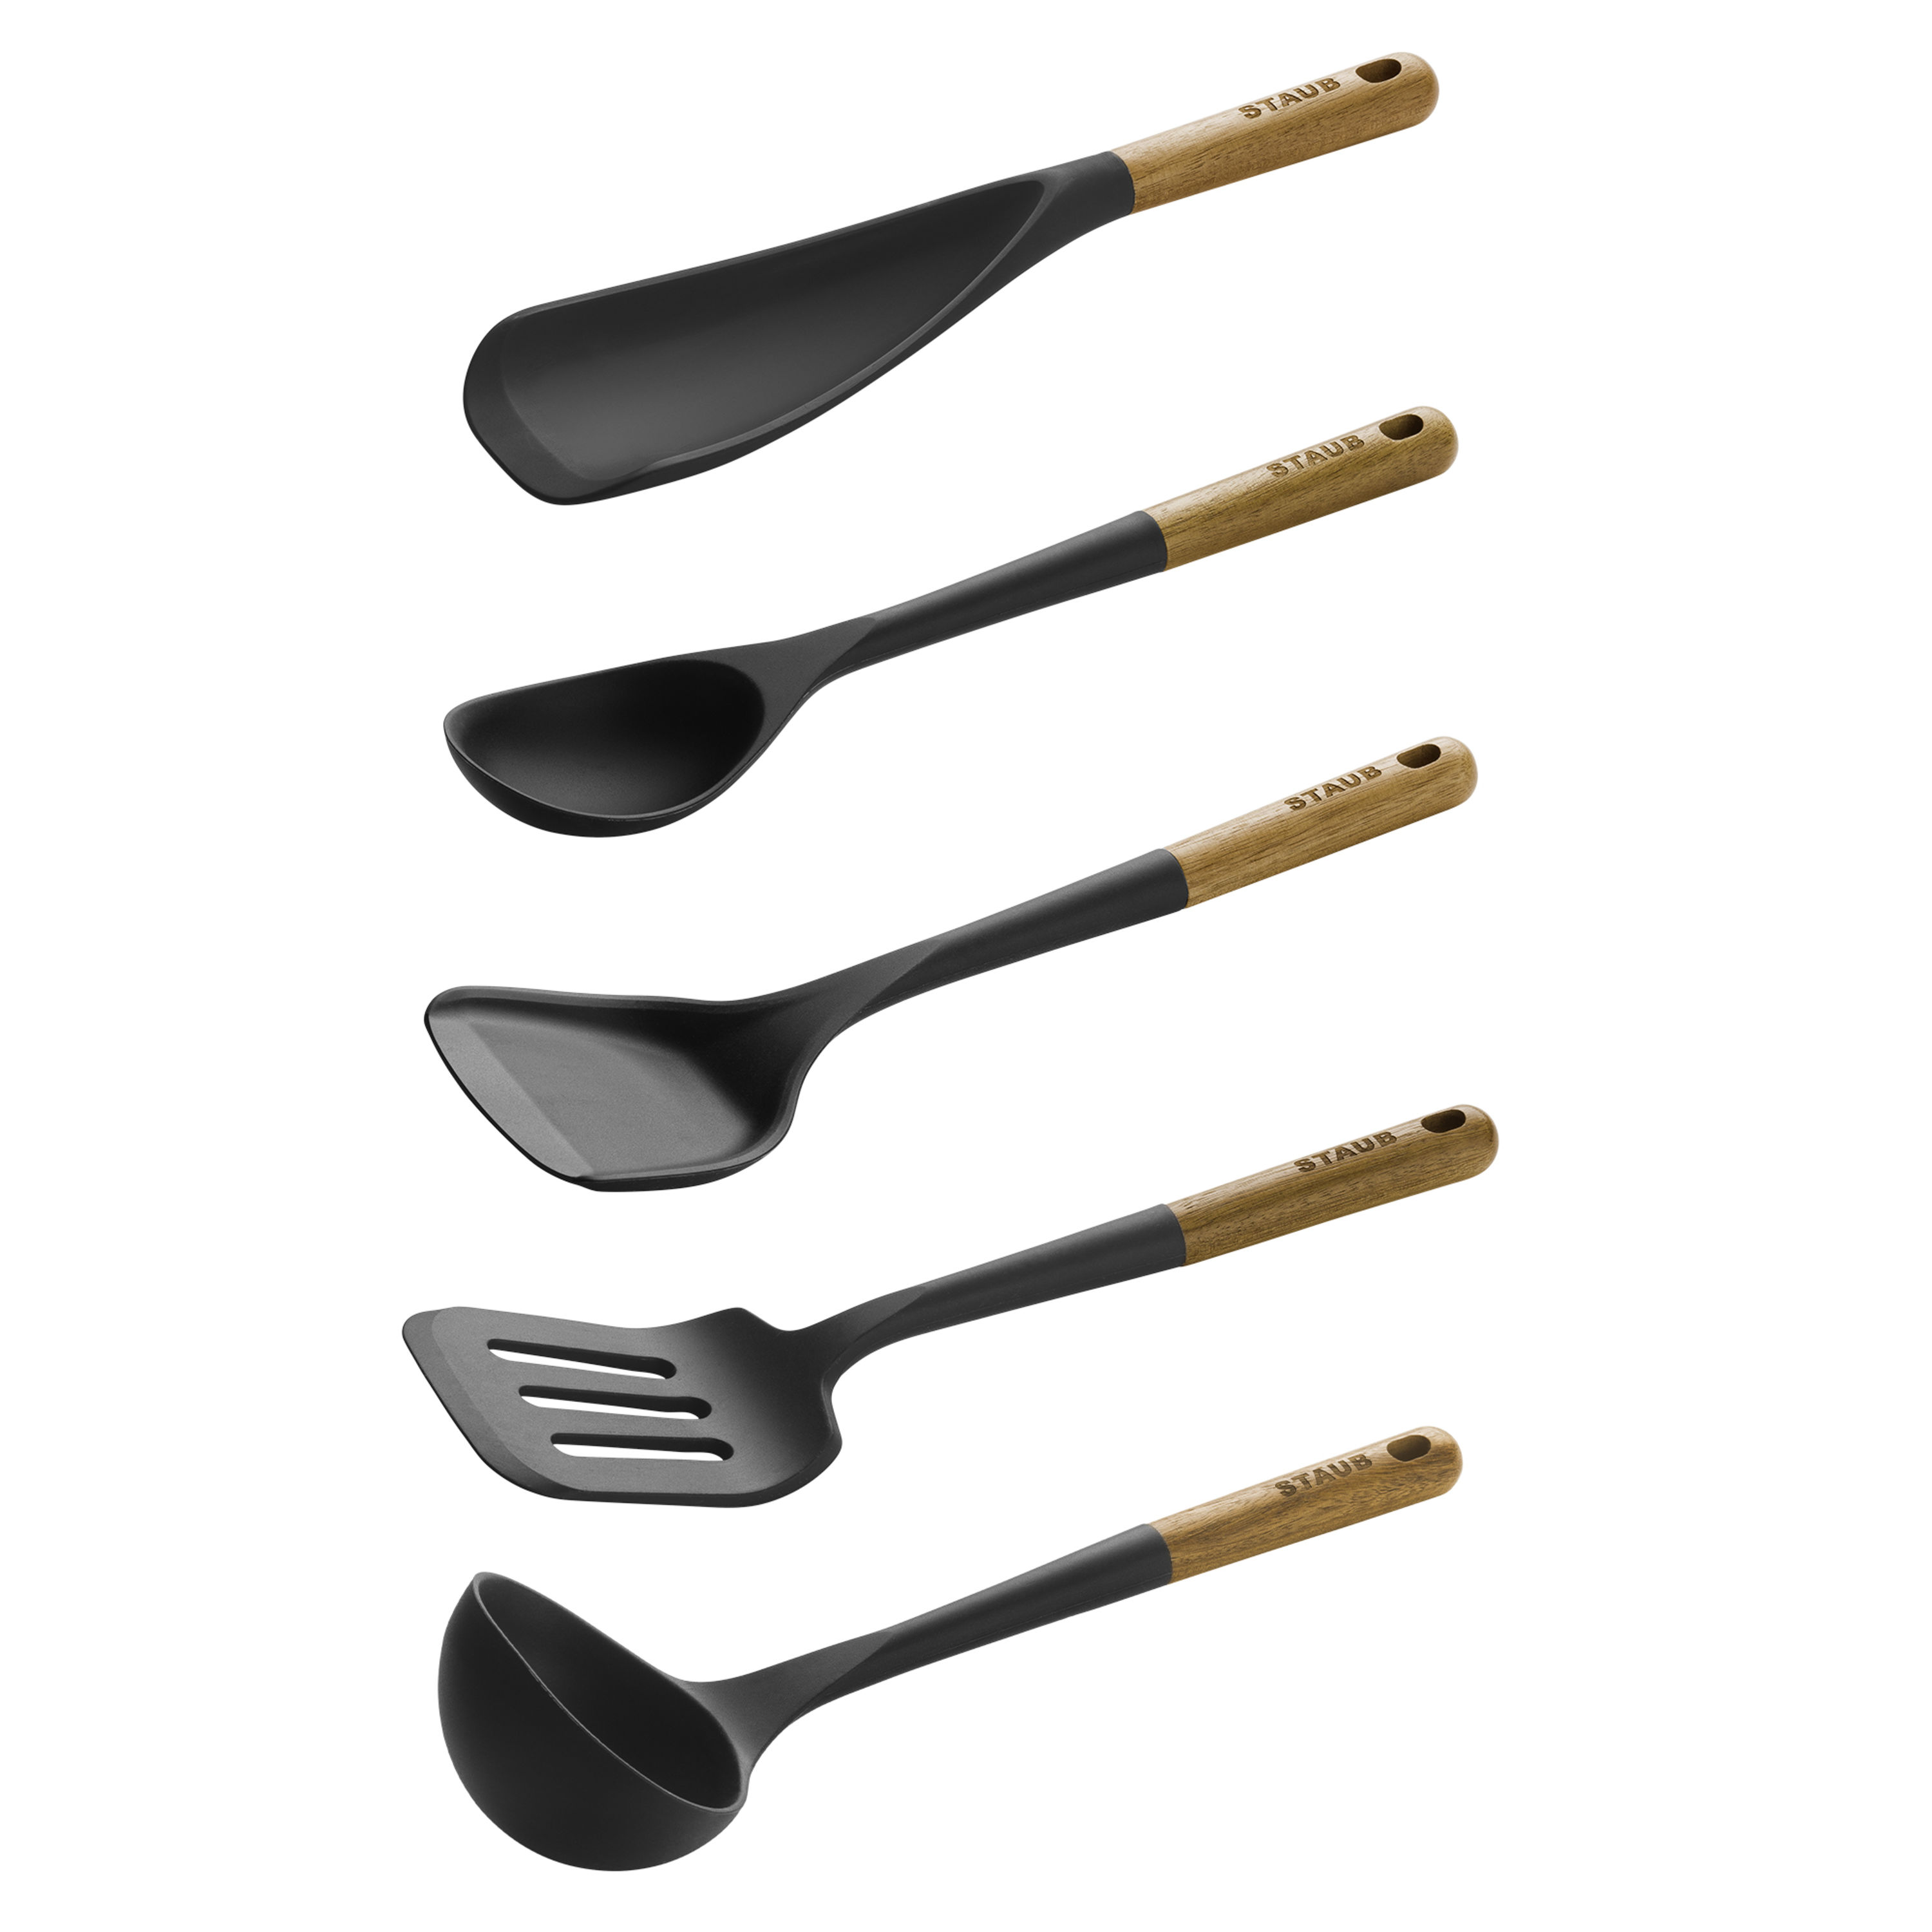 Silicone Kitchen Utensils Set (5 Piece) by StarPack – StarPack Products